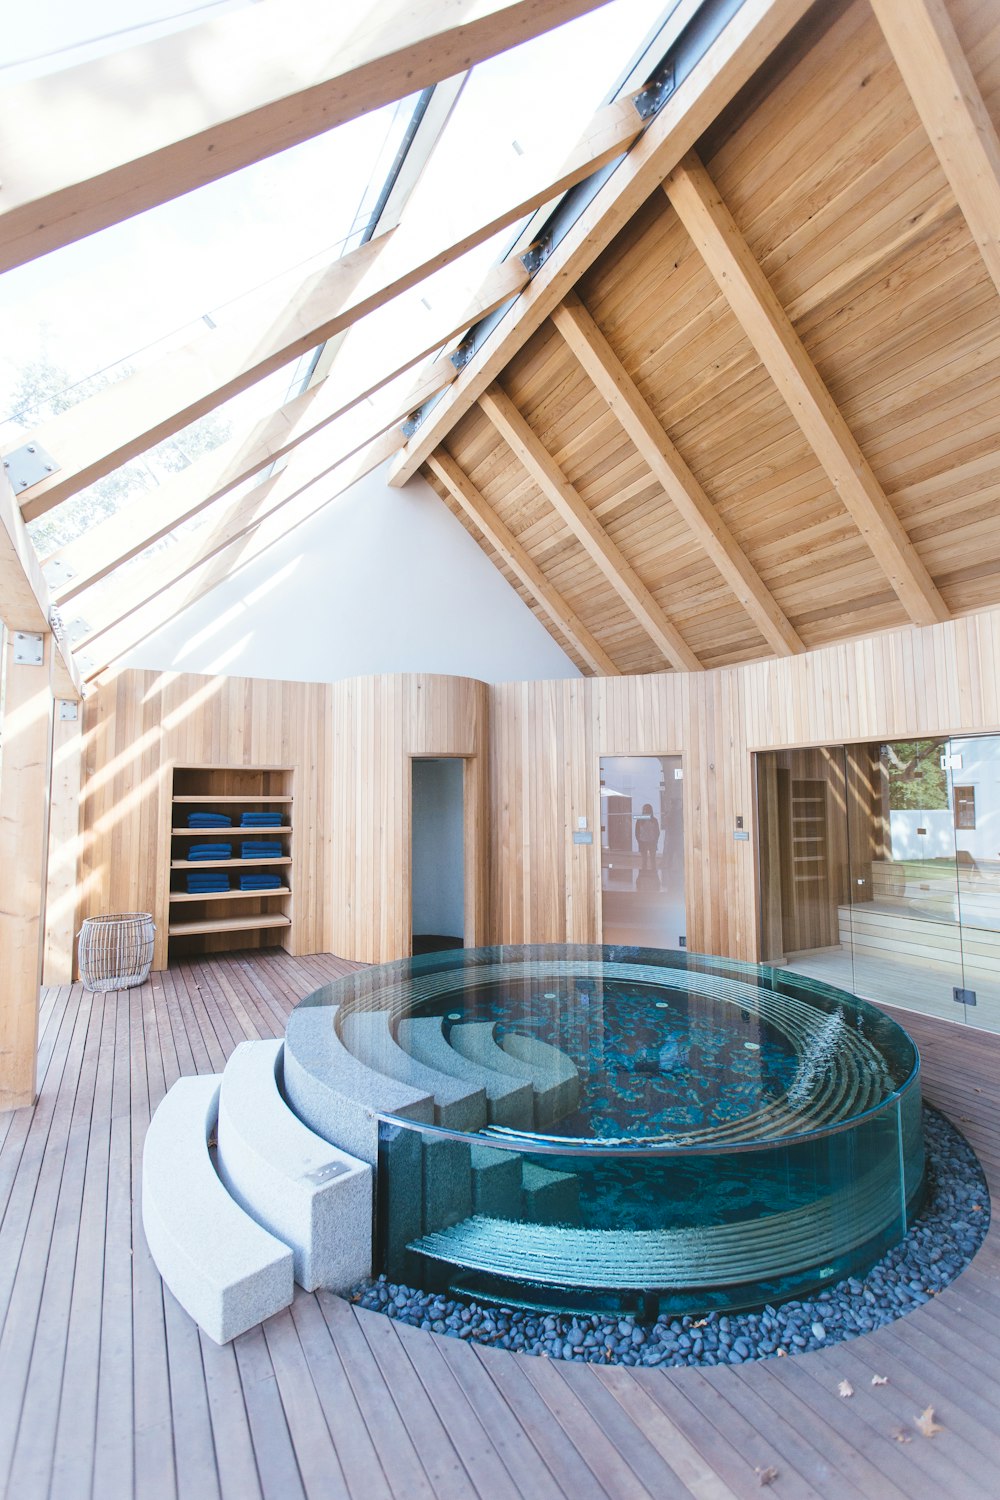 A beautiful indoor spa tub fit for six people.